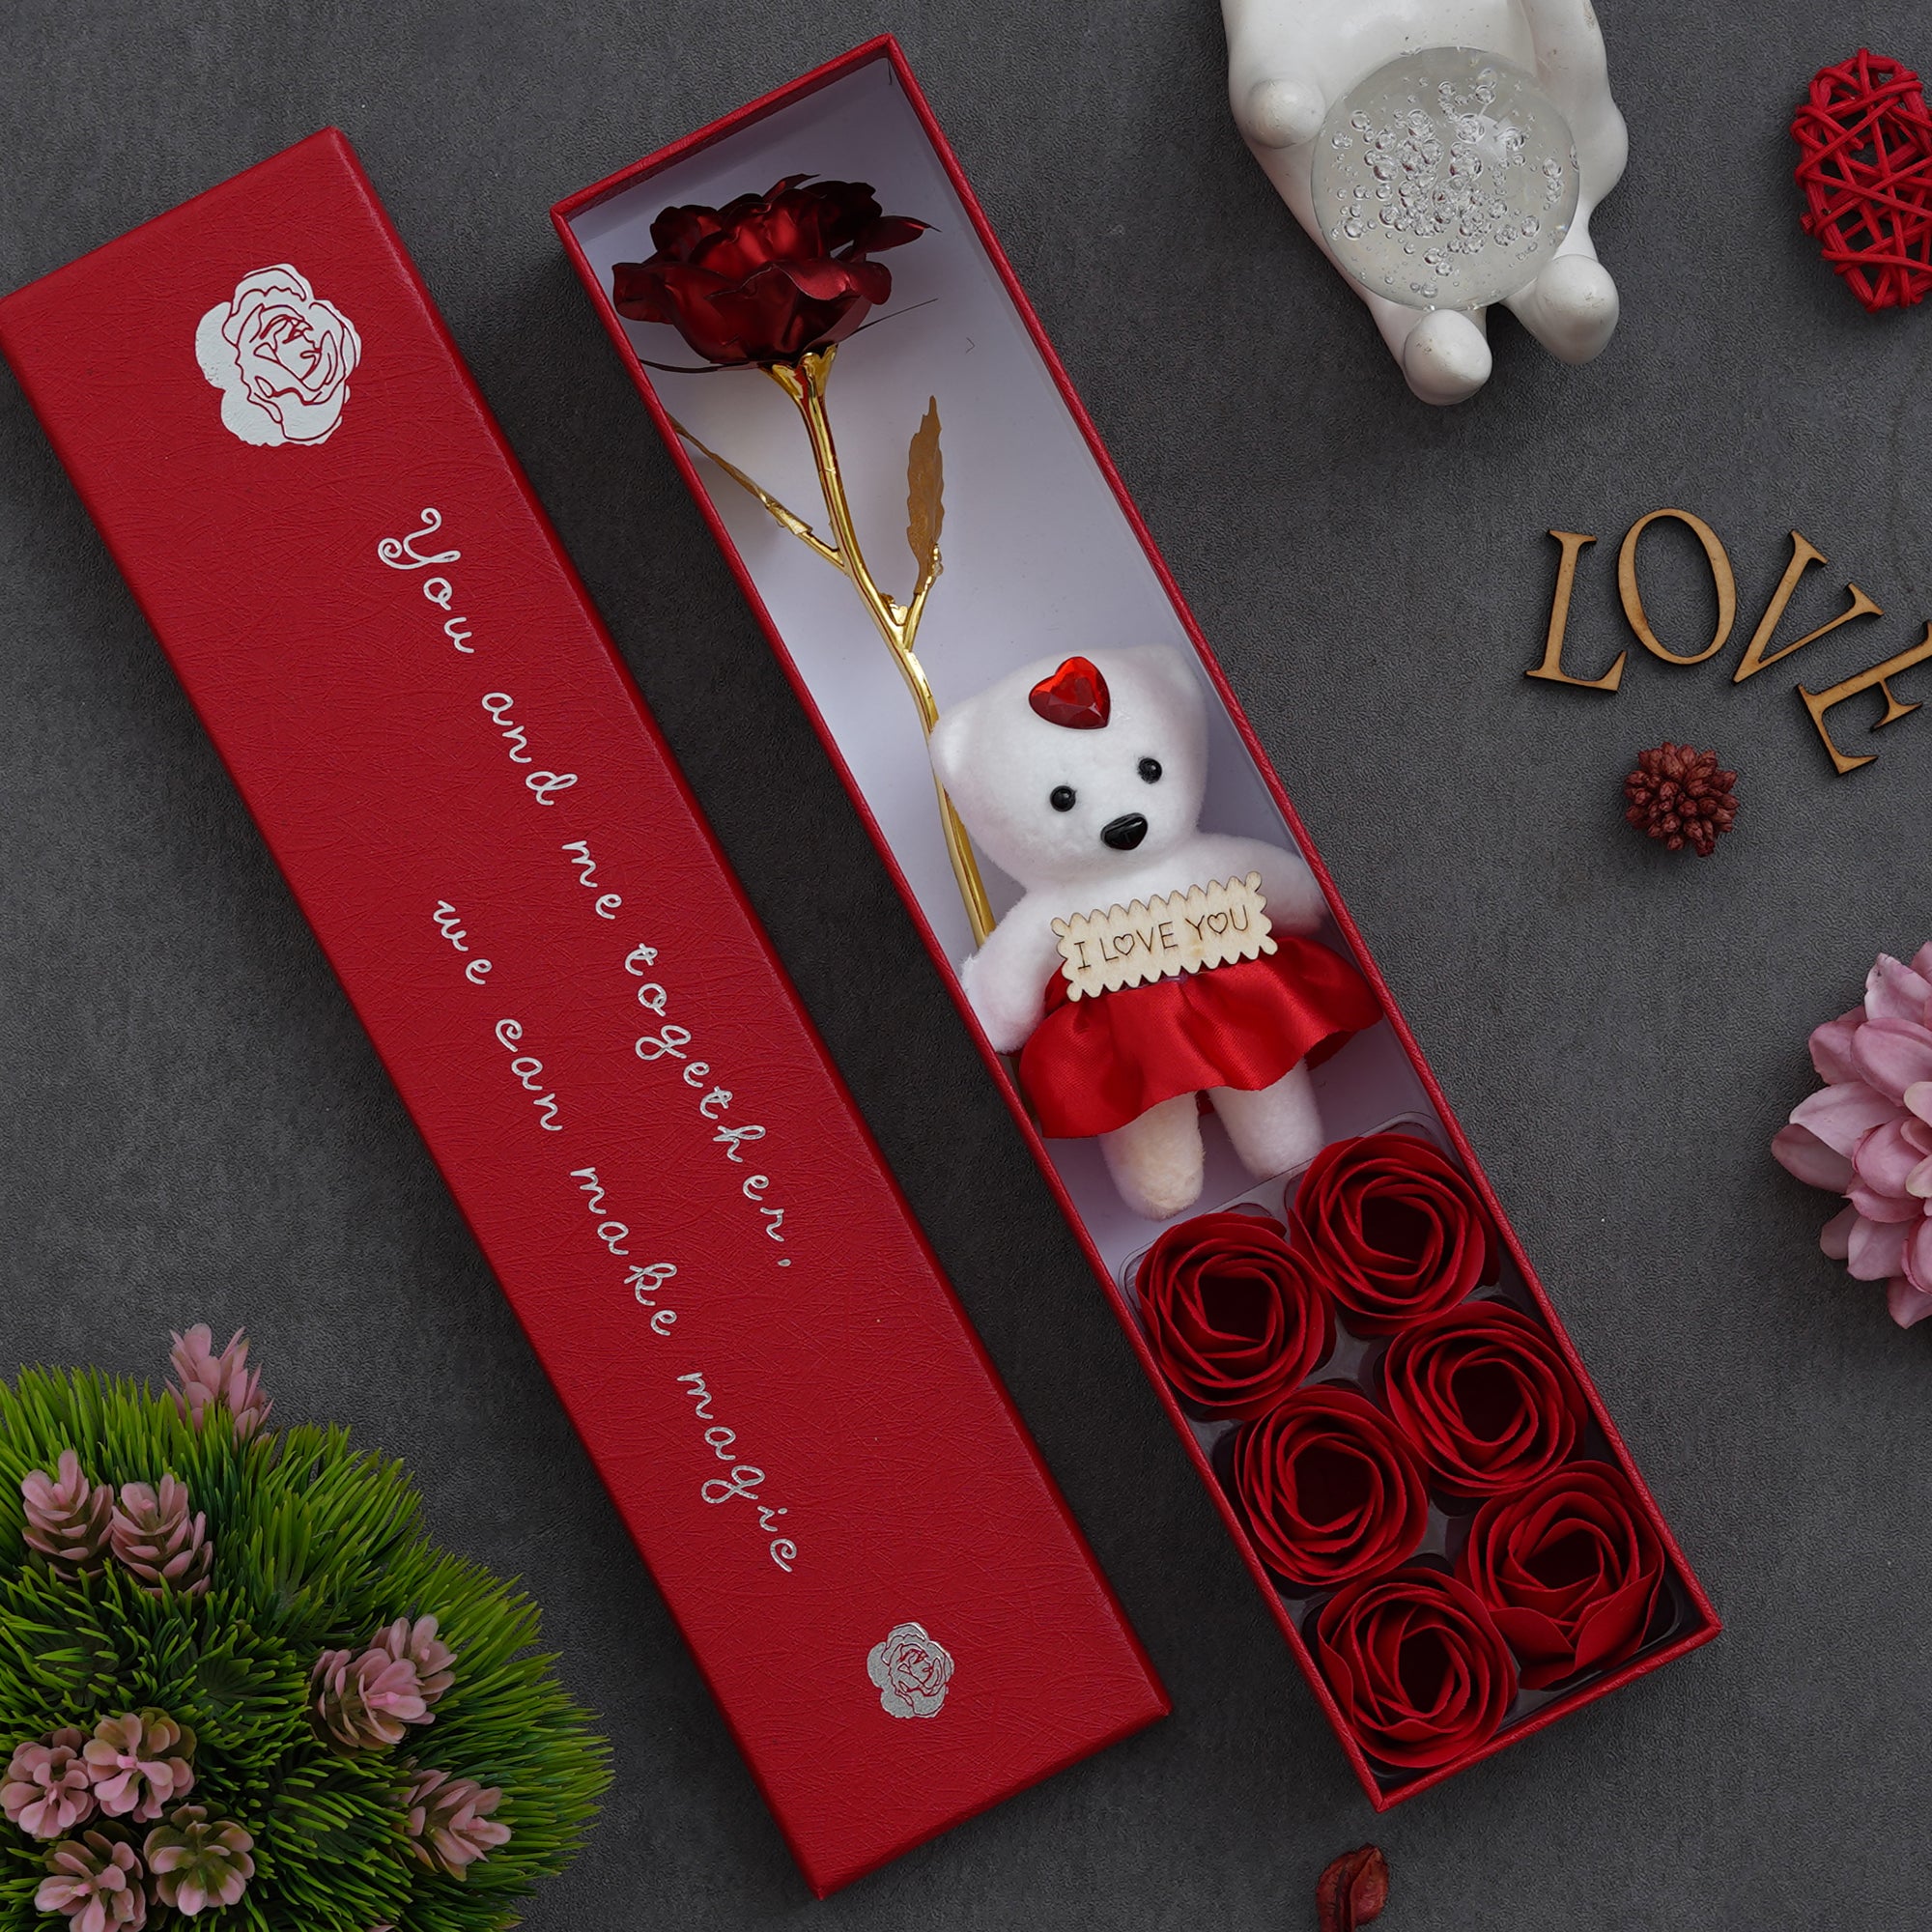 Valentine Combo of Set of 8 Love Post Cards Gift Cards Set, Red Gift Box with Teddy & Roses, "20 Reasons Why I Love You" Printed on Little Red Hearts Decorative Wooden Gift Set Box 3